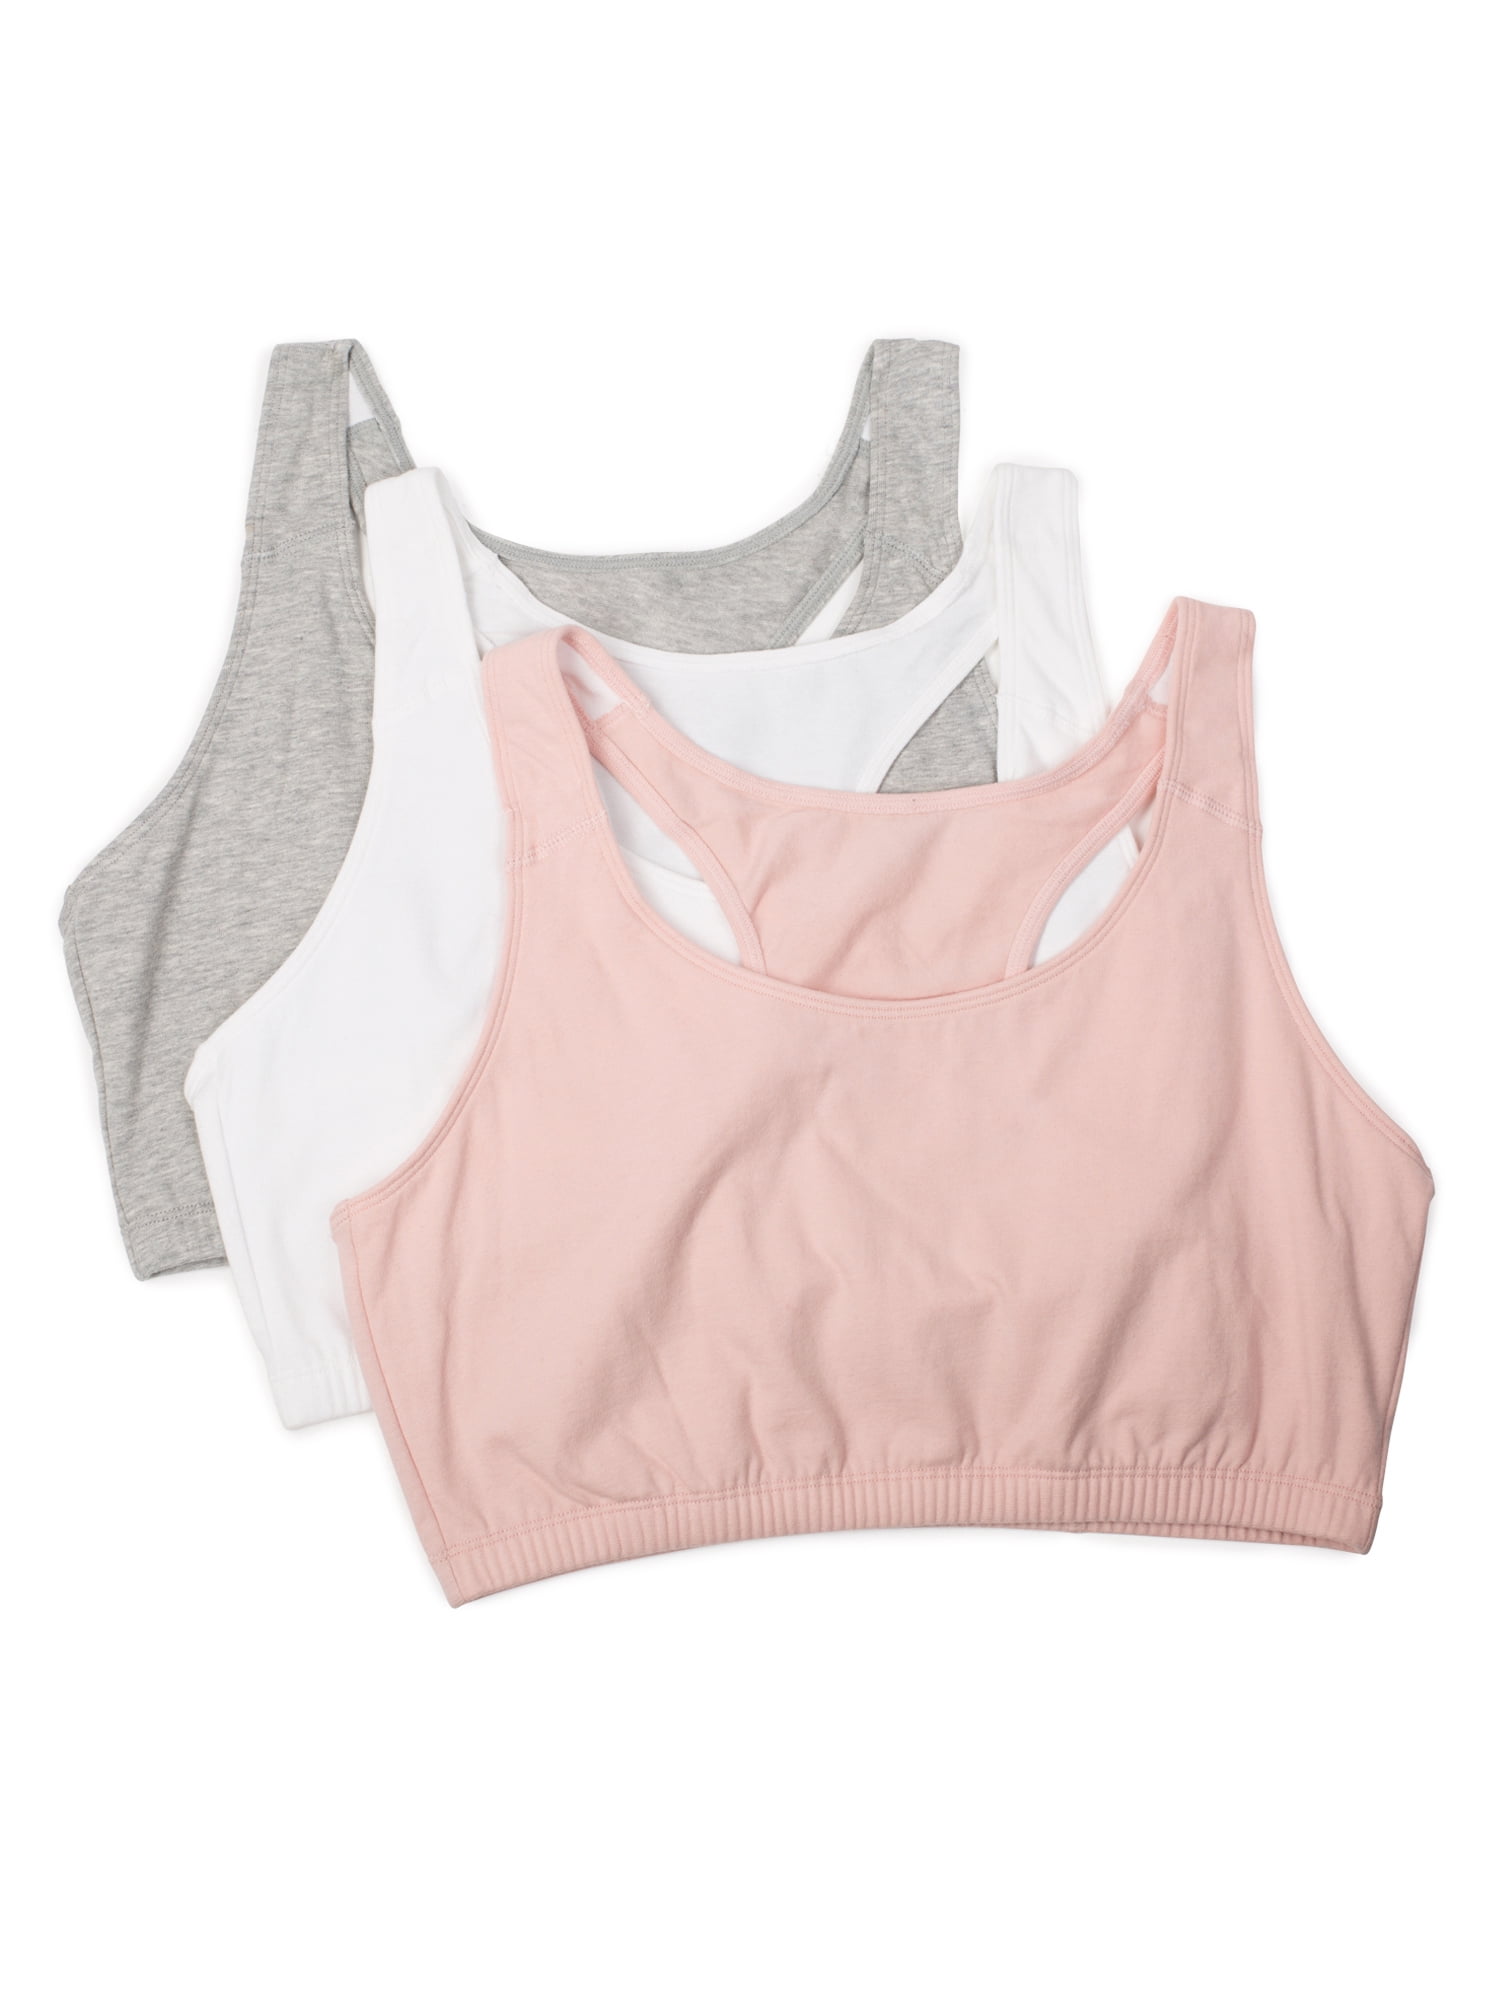 Fruit of the Loom Womens Built Up Tank Style Sports Bra in Bahrain